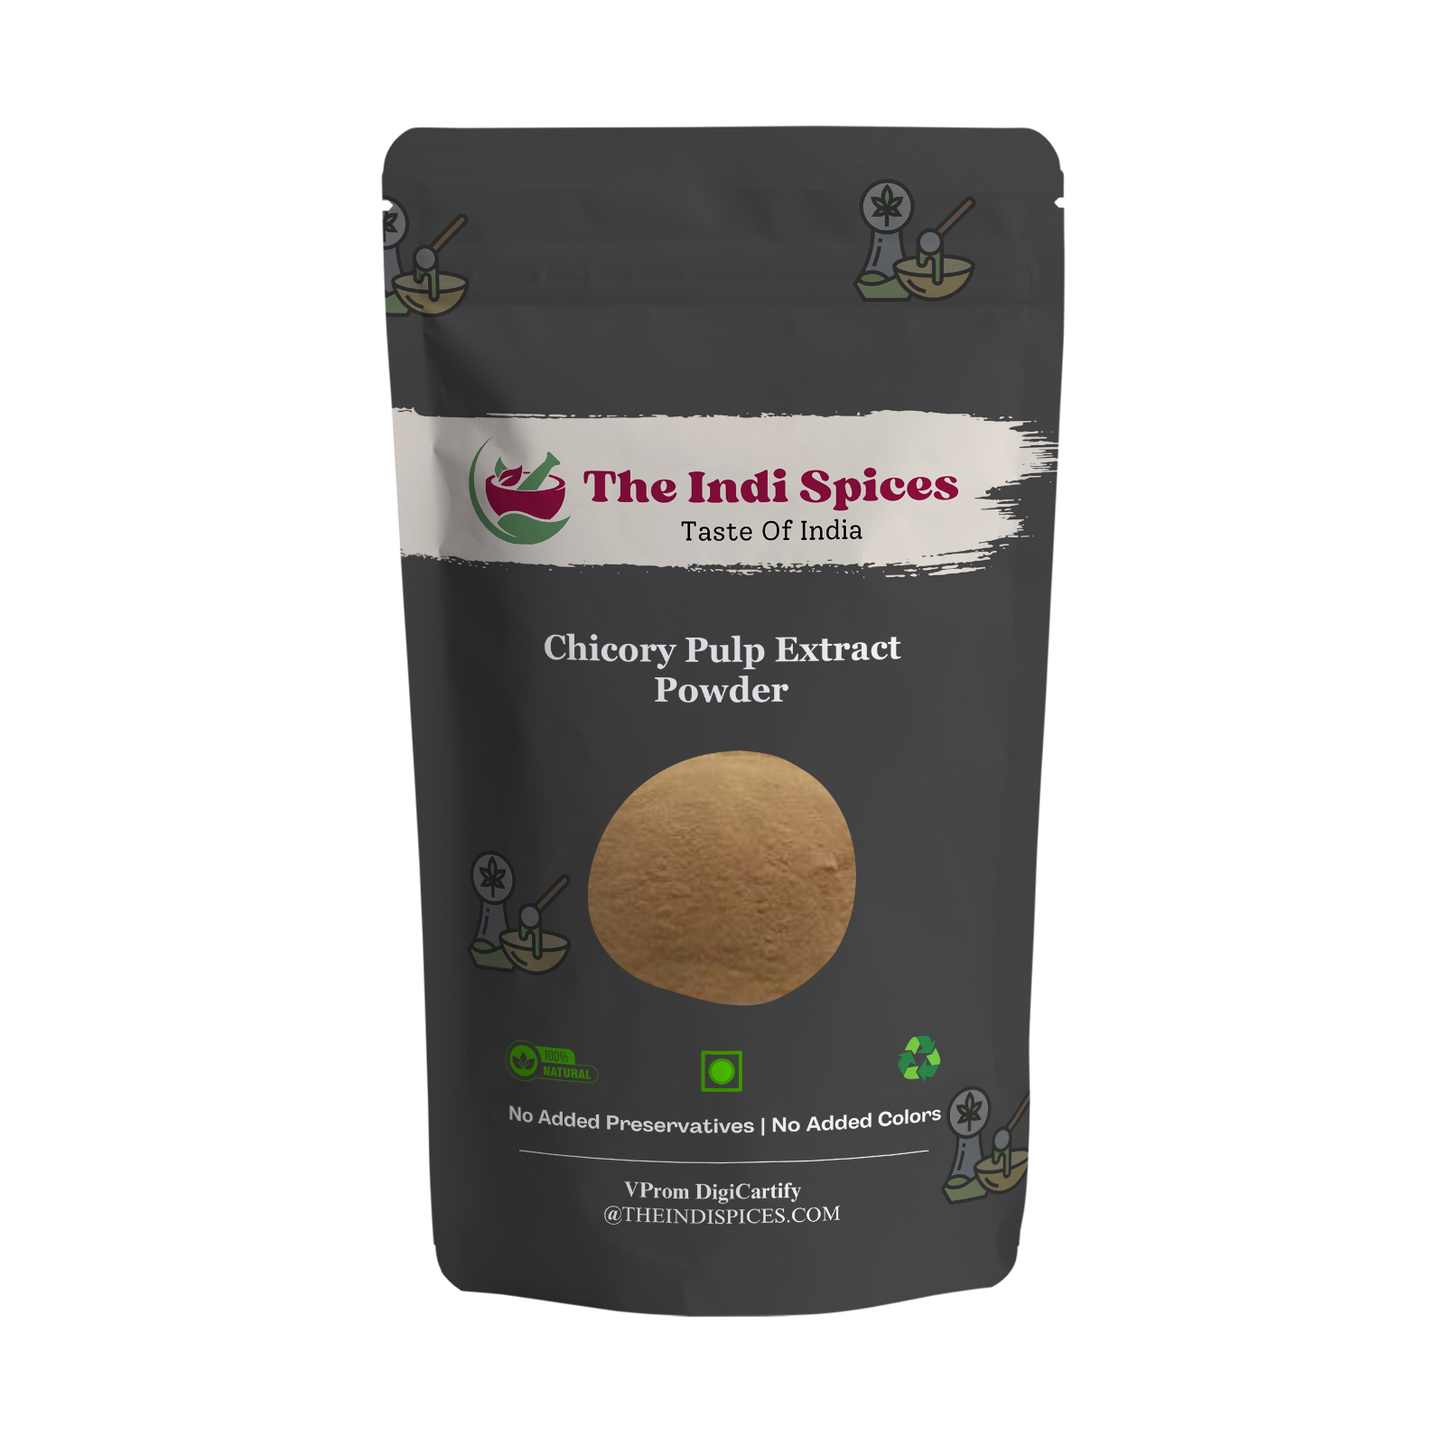 Chicory Pulp Extract Powder